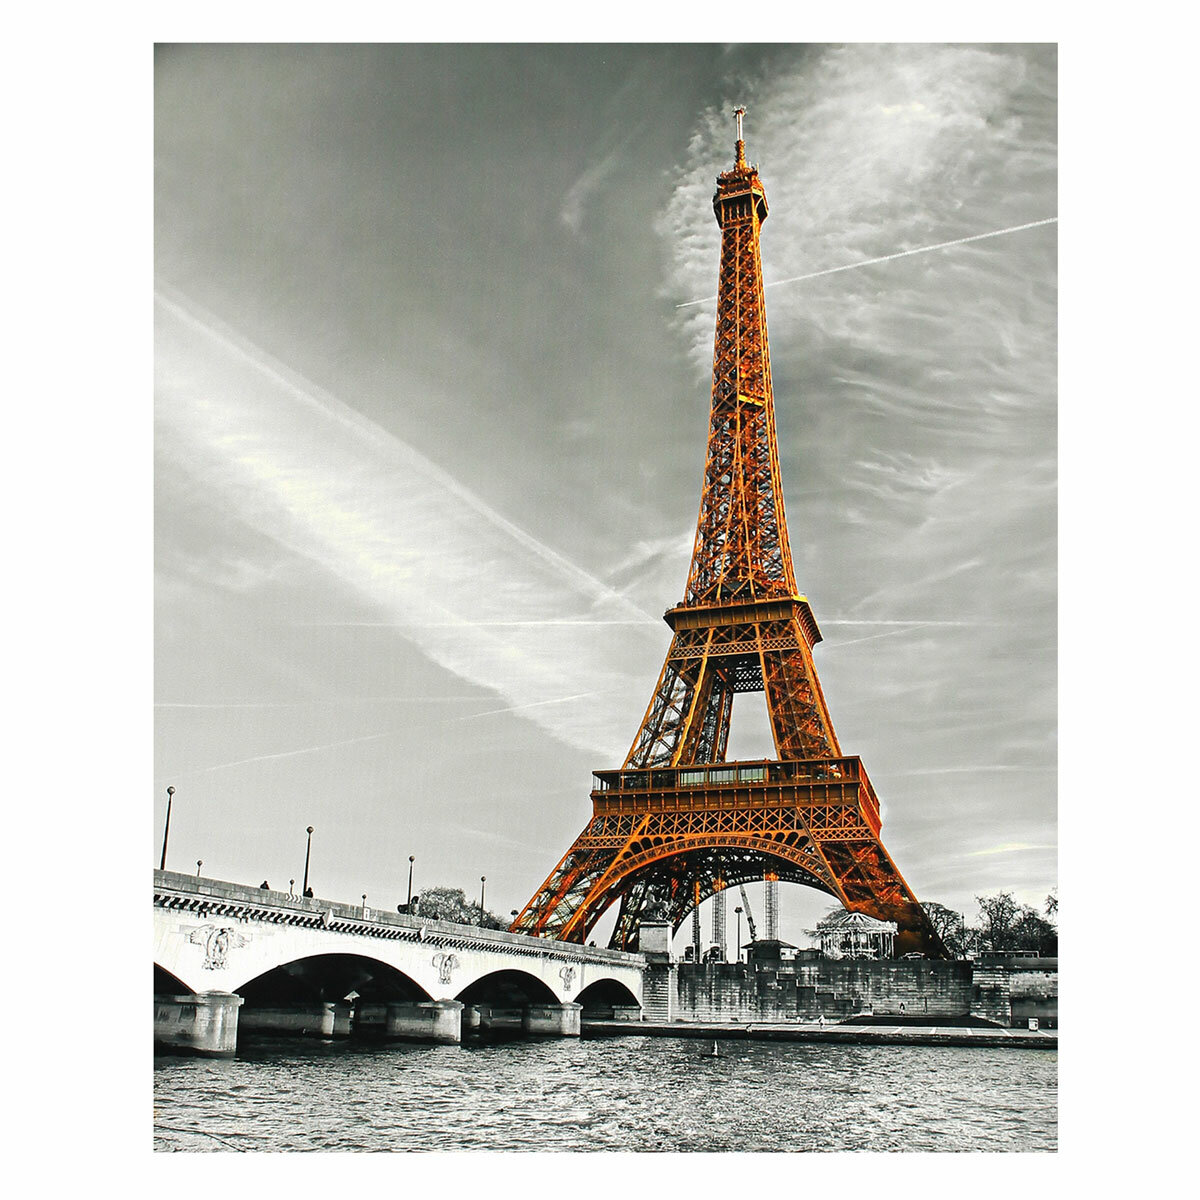 

1 Piece Eiffel Tower Wall Decorative Painting Canvas Print Art Pictures Frameless Wall Hanging Decorations for Home Offi